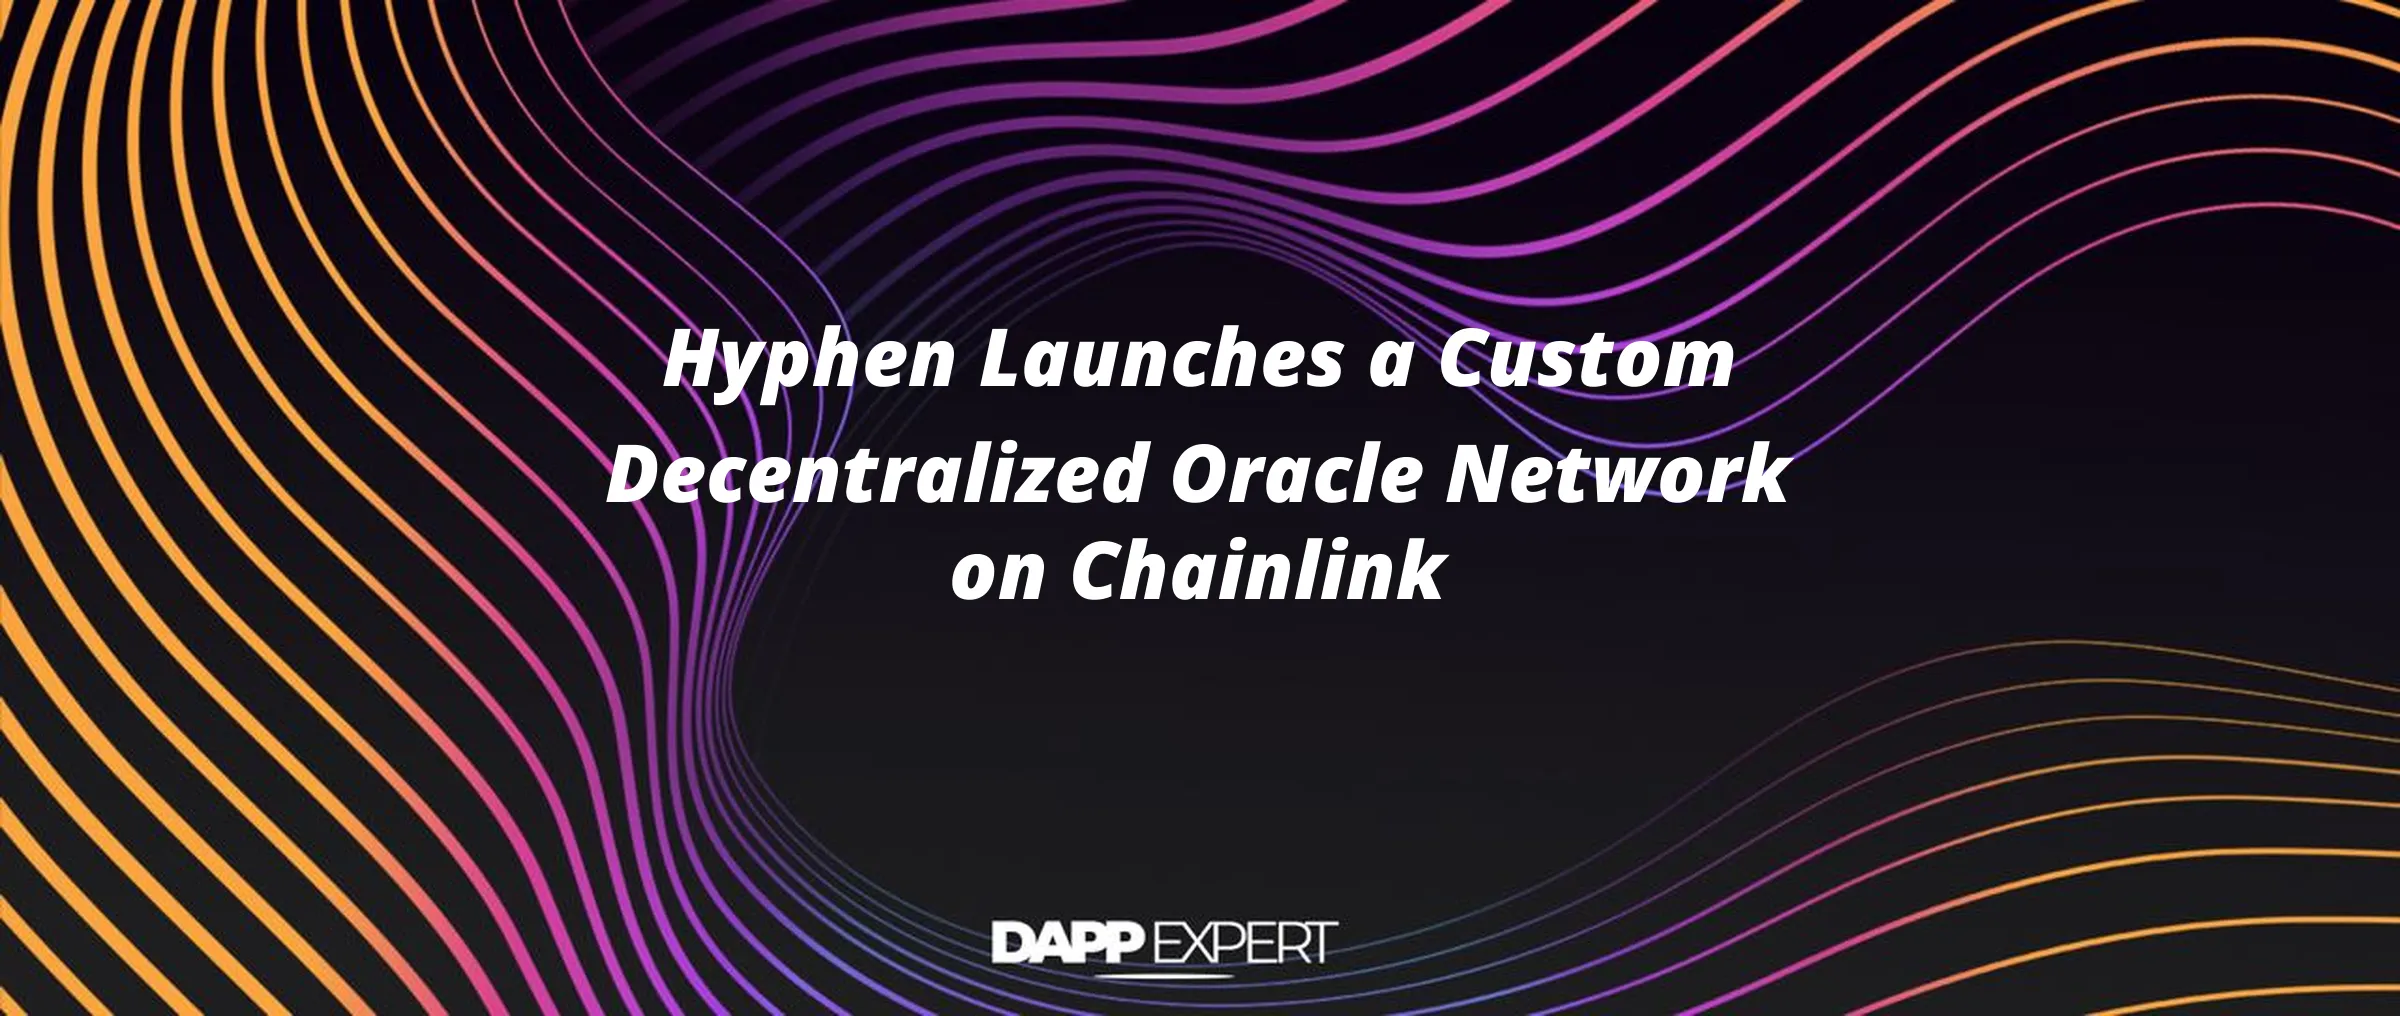 Hyphen Launches a Custom Decentralized Oracle Network on Chainlink